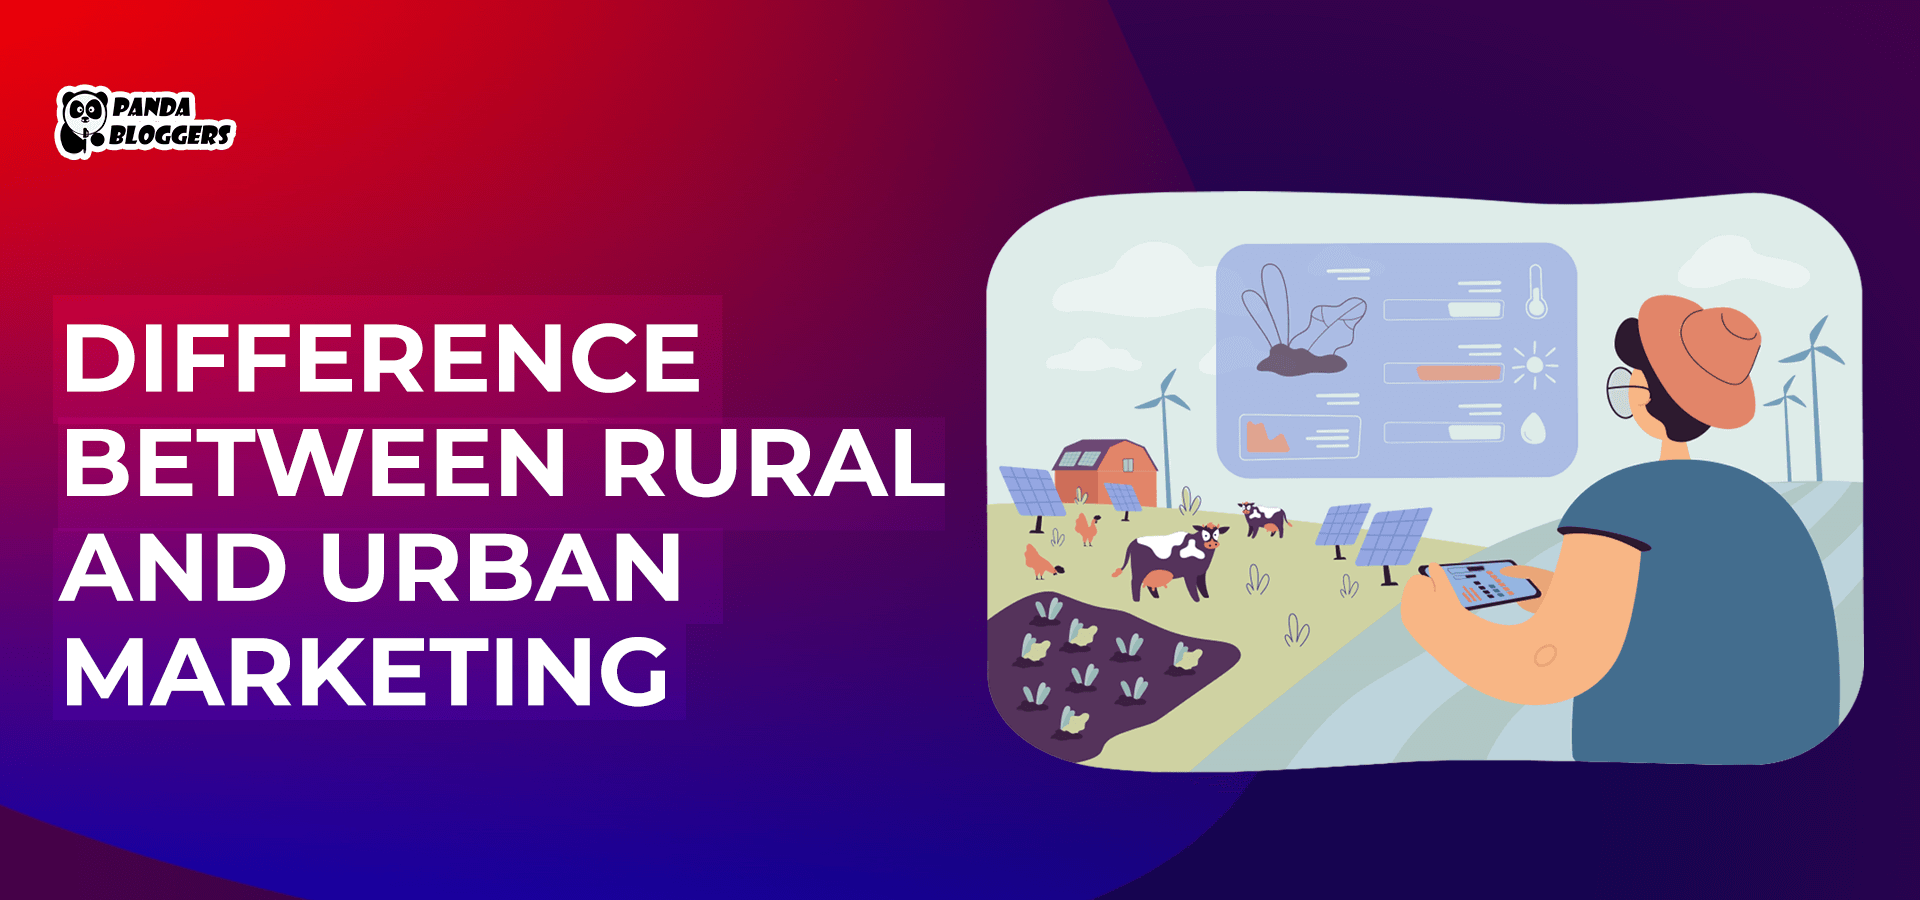 Difference between Rural and Urban Marketing